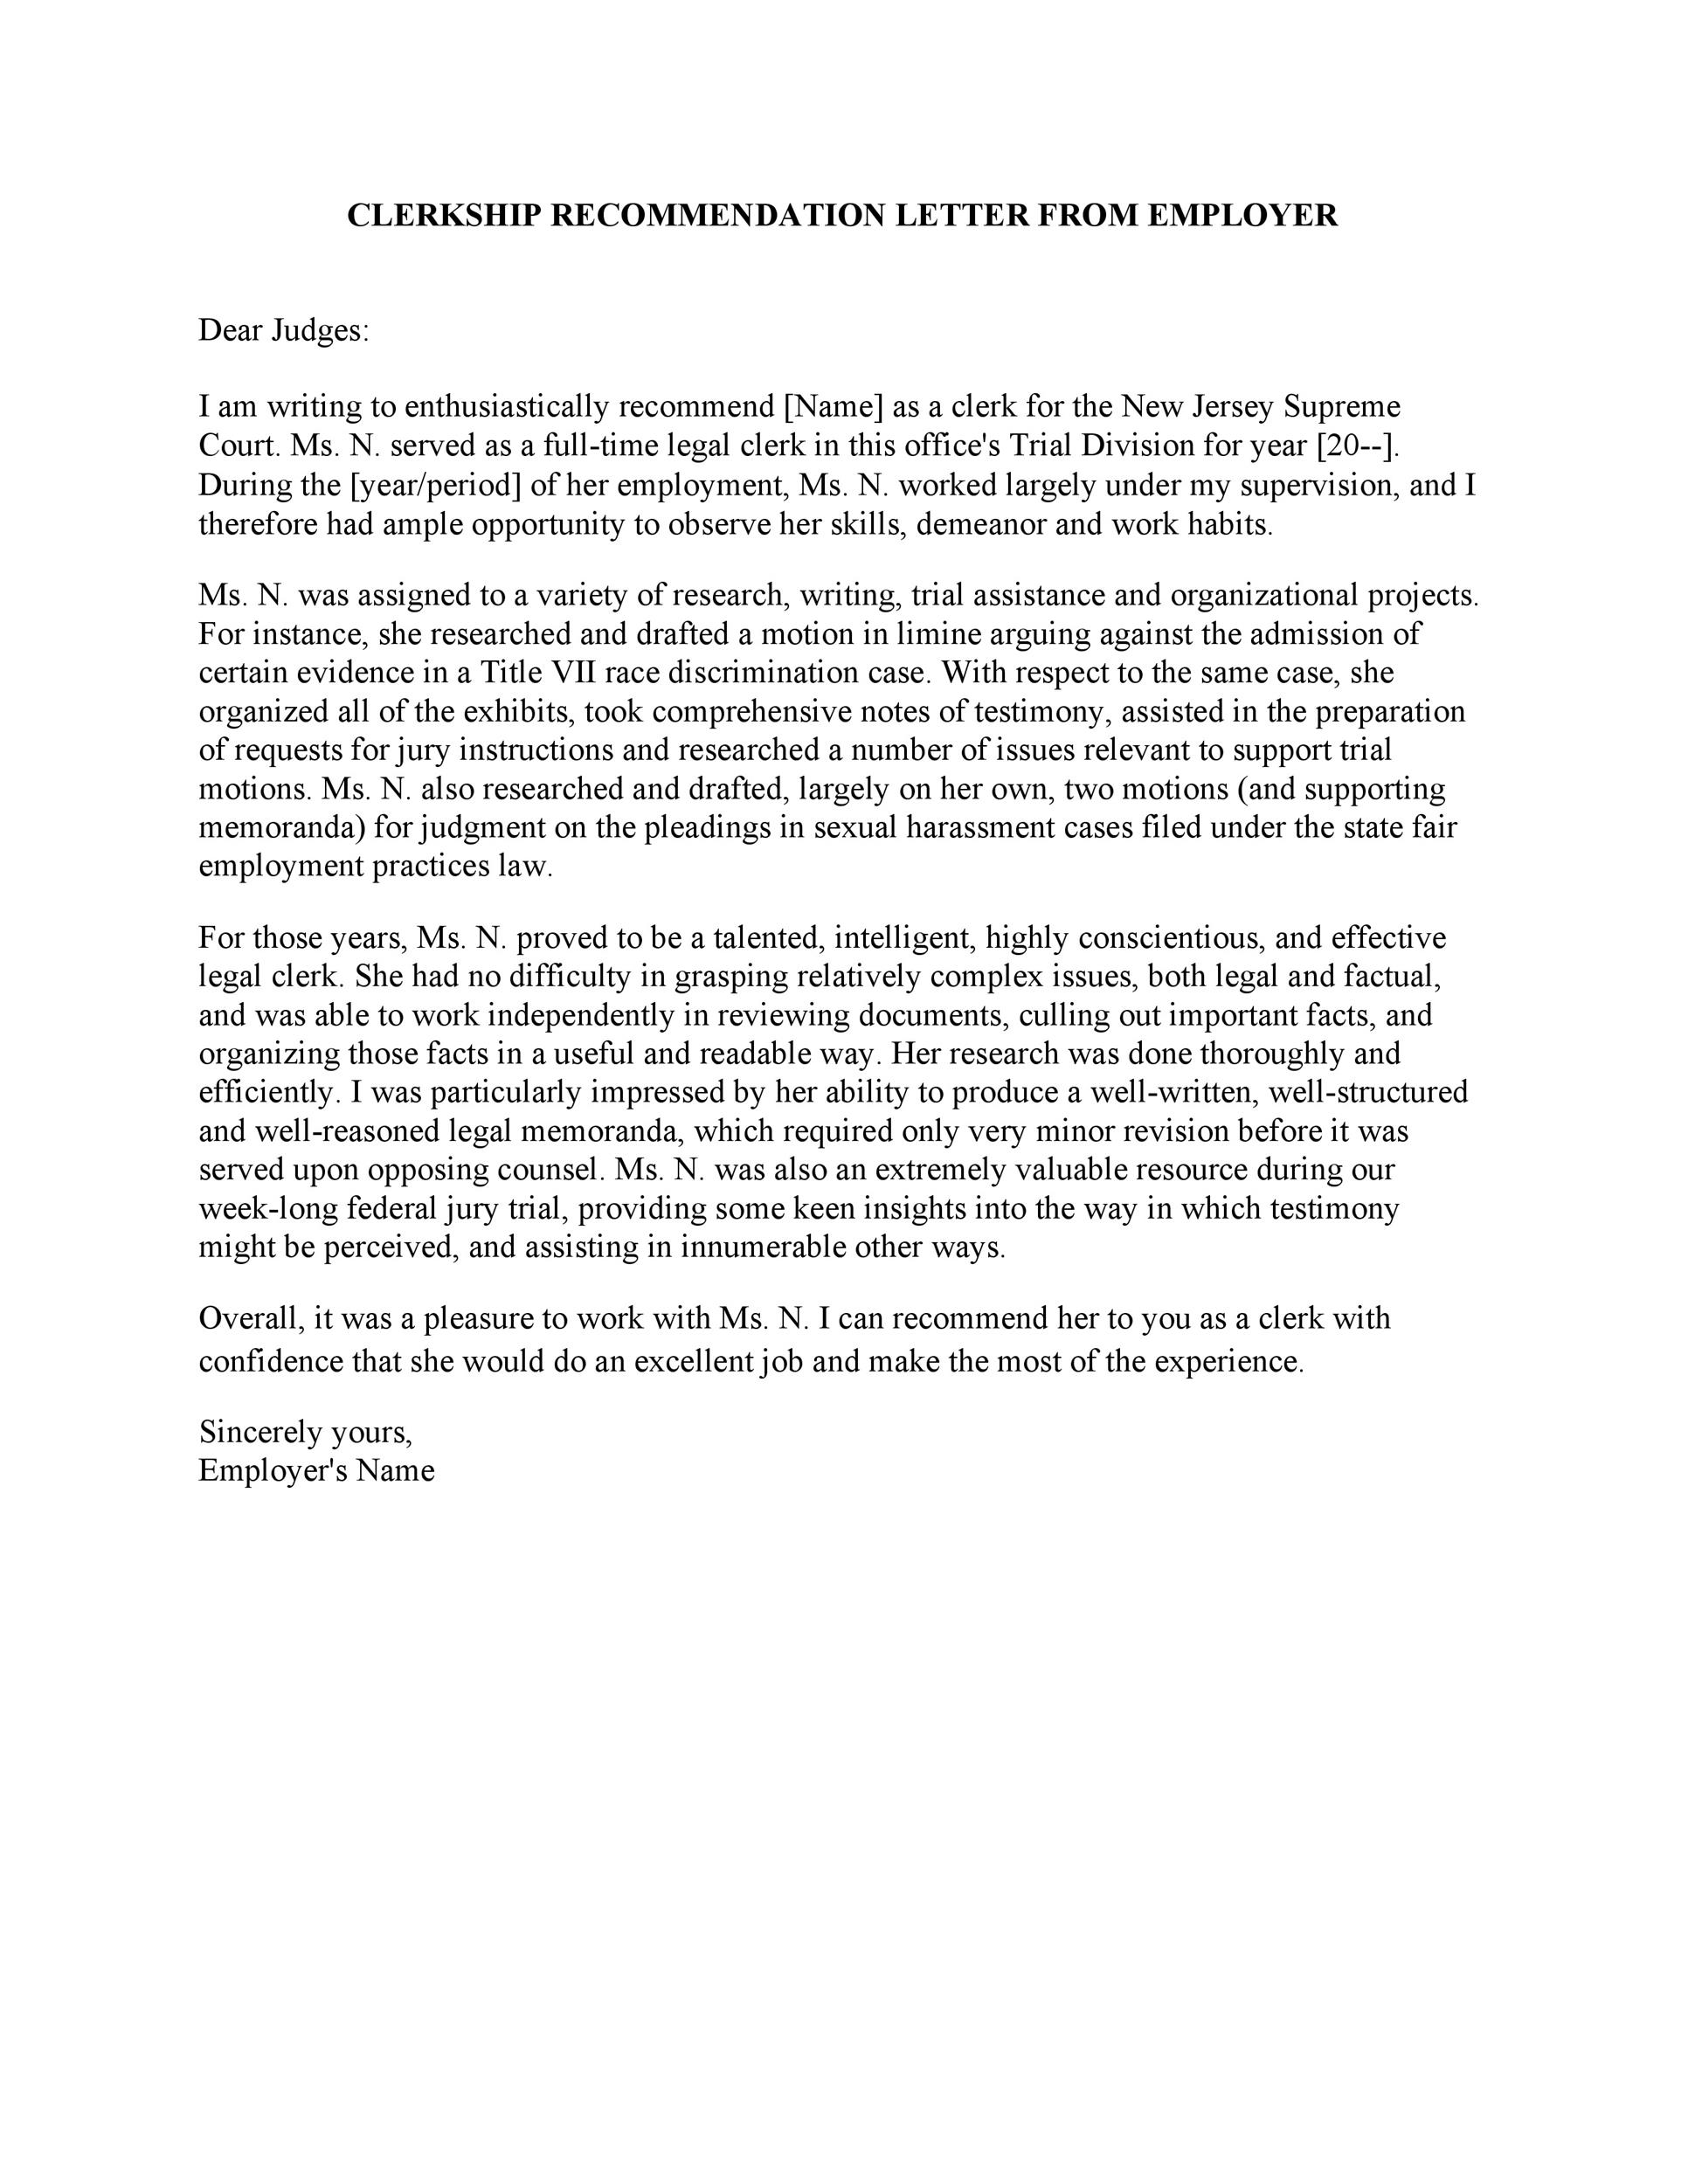 Sample Employers Reference Letter from templatelab.com